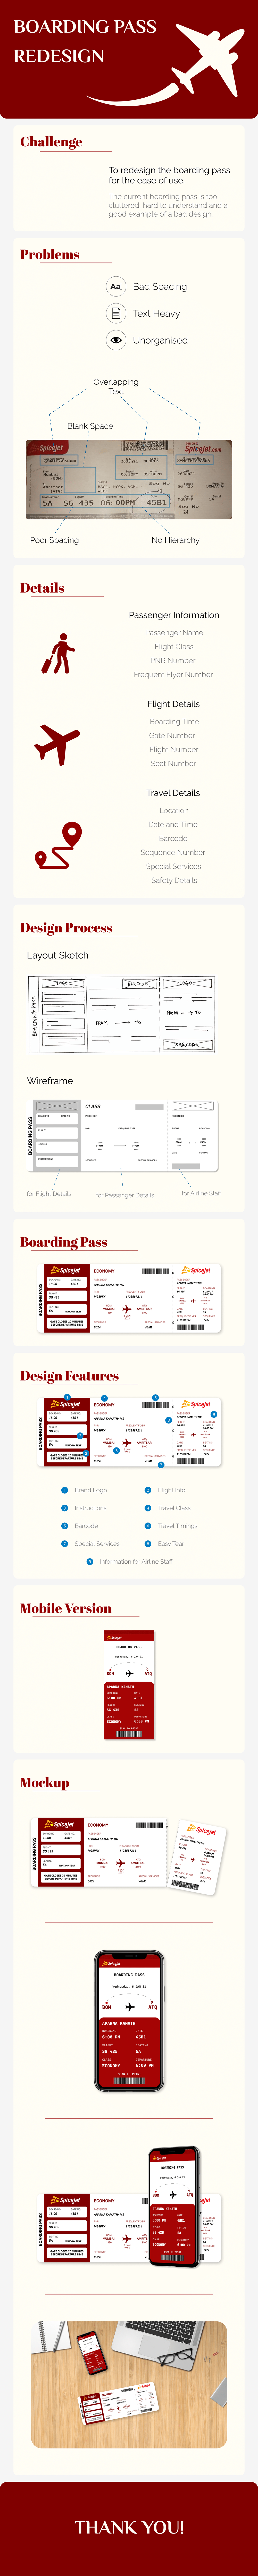 airplane Boarding Pass redesign spicejet   visual